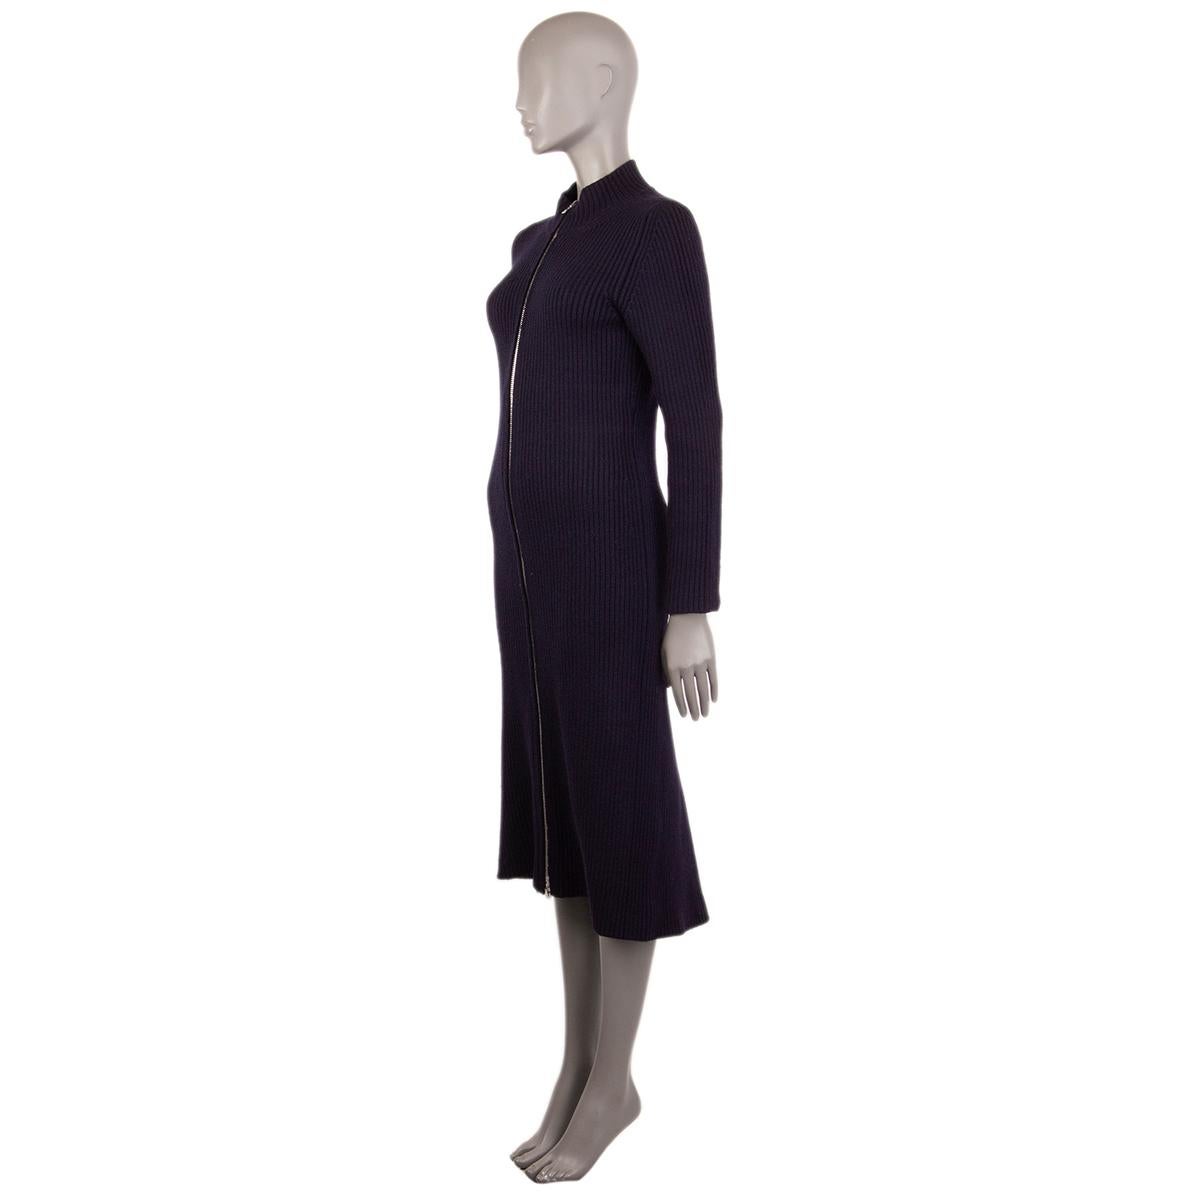 100% authentic Miu Miu long knit coat in dark blue rib wool (100%) with zip. Has been worn and is in excellent condition.

Measurements
Tag Size	42
Size	M
Shoulder Width	39cm (15.2in)
Bust	82cm (32in) to 92cm (35.9in)
Waist	72cm (28.1in) to 82cm